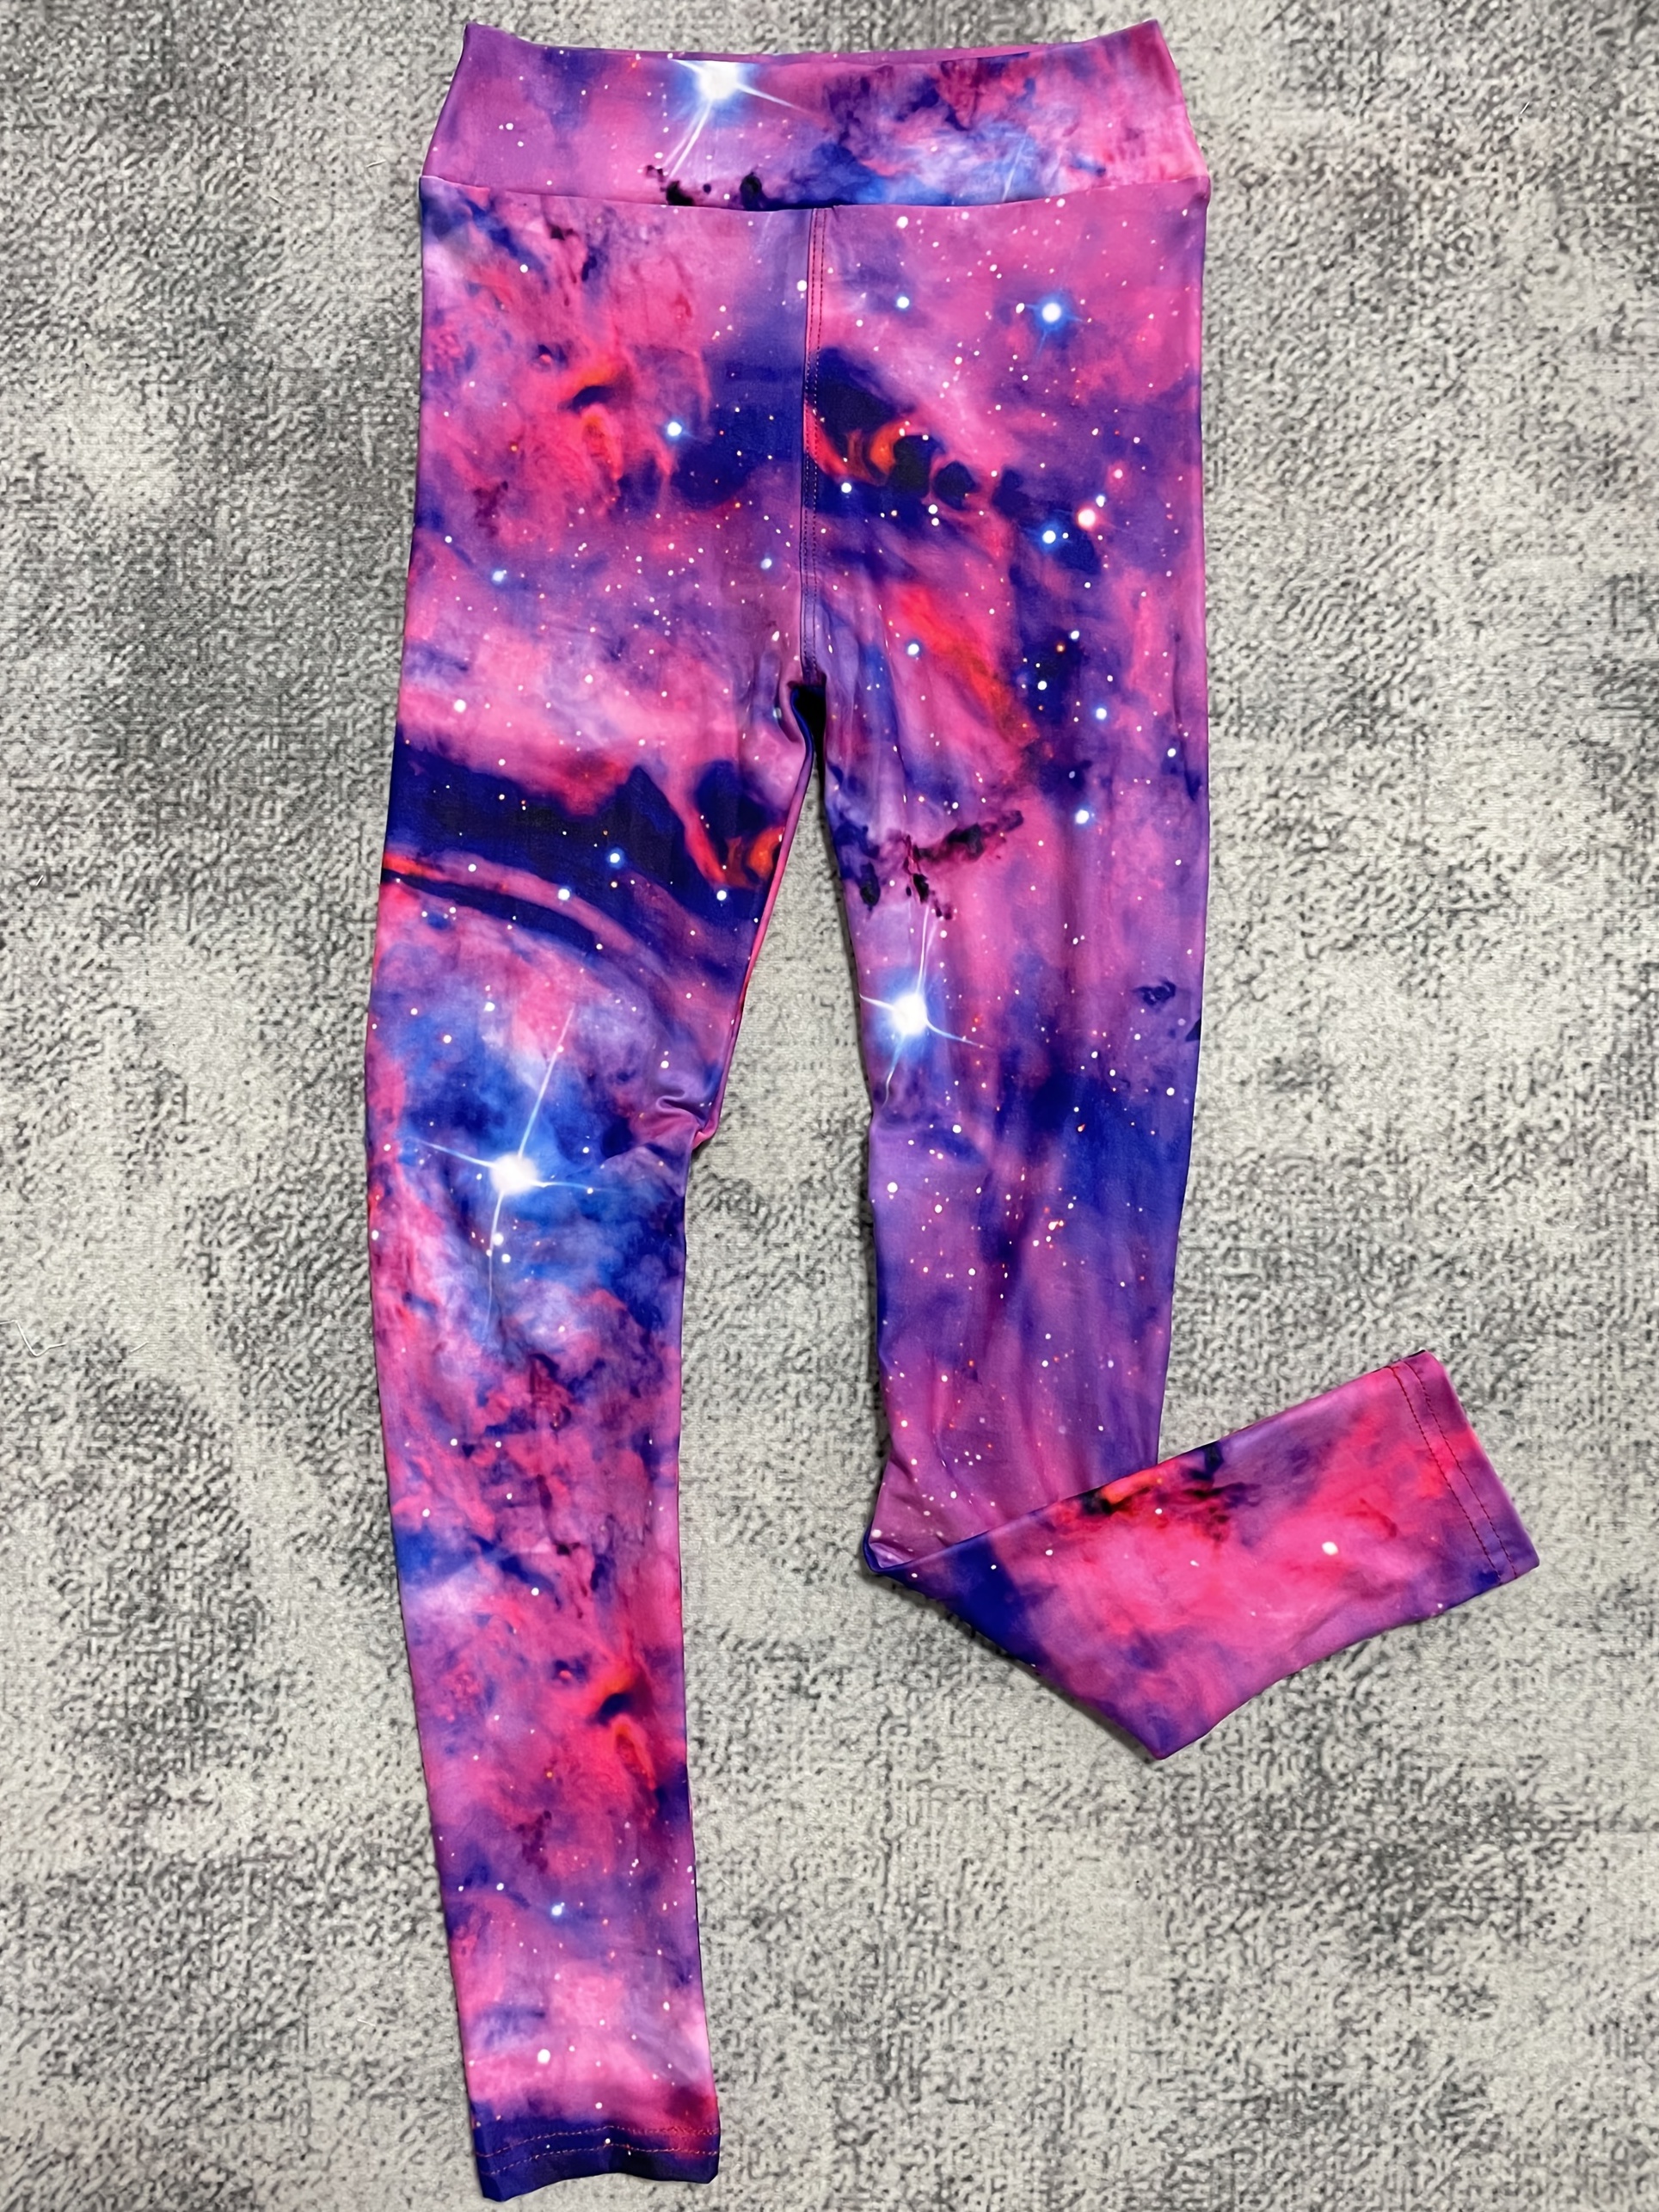  Galaxy Star Space Girls Leggings Printed Pants Clothes